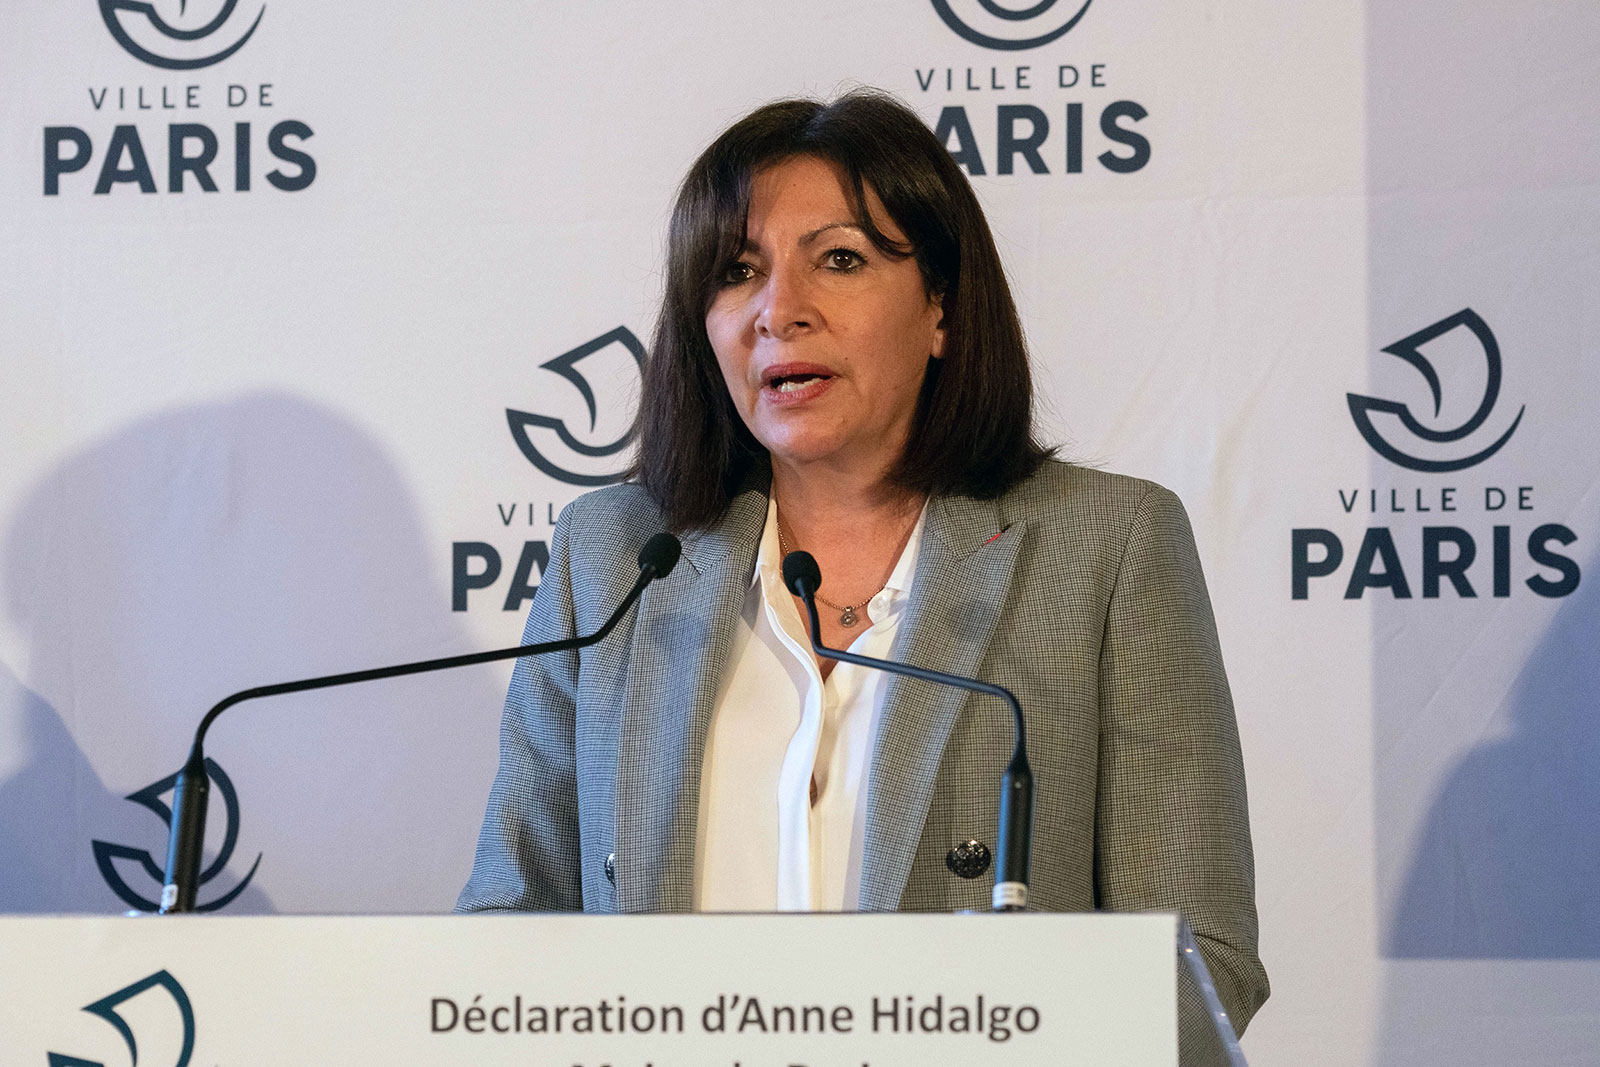 Paris mayor Anne Hidalgo speaks during a press conference on Monday, March 1.